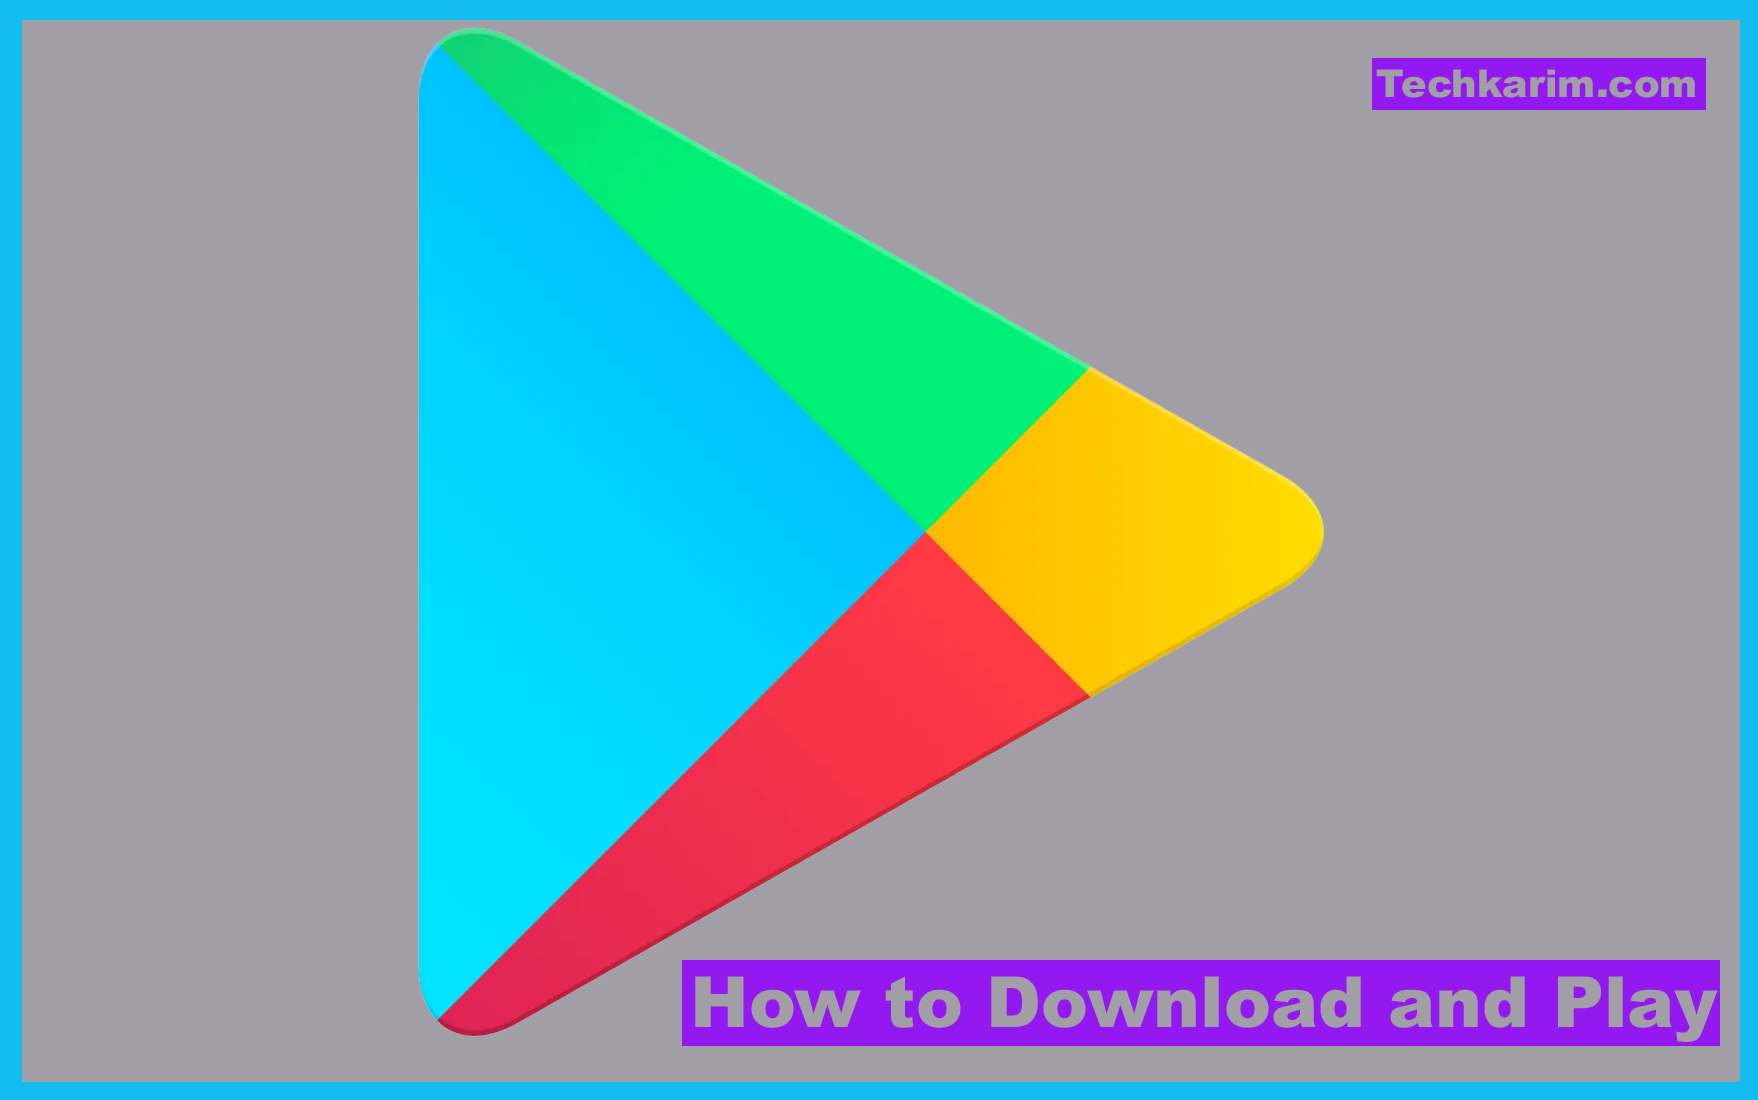 How to Download and Play